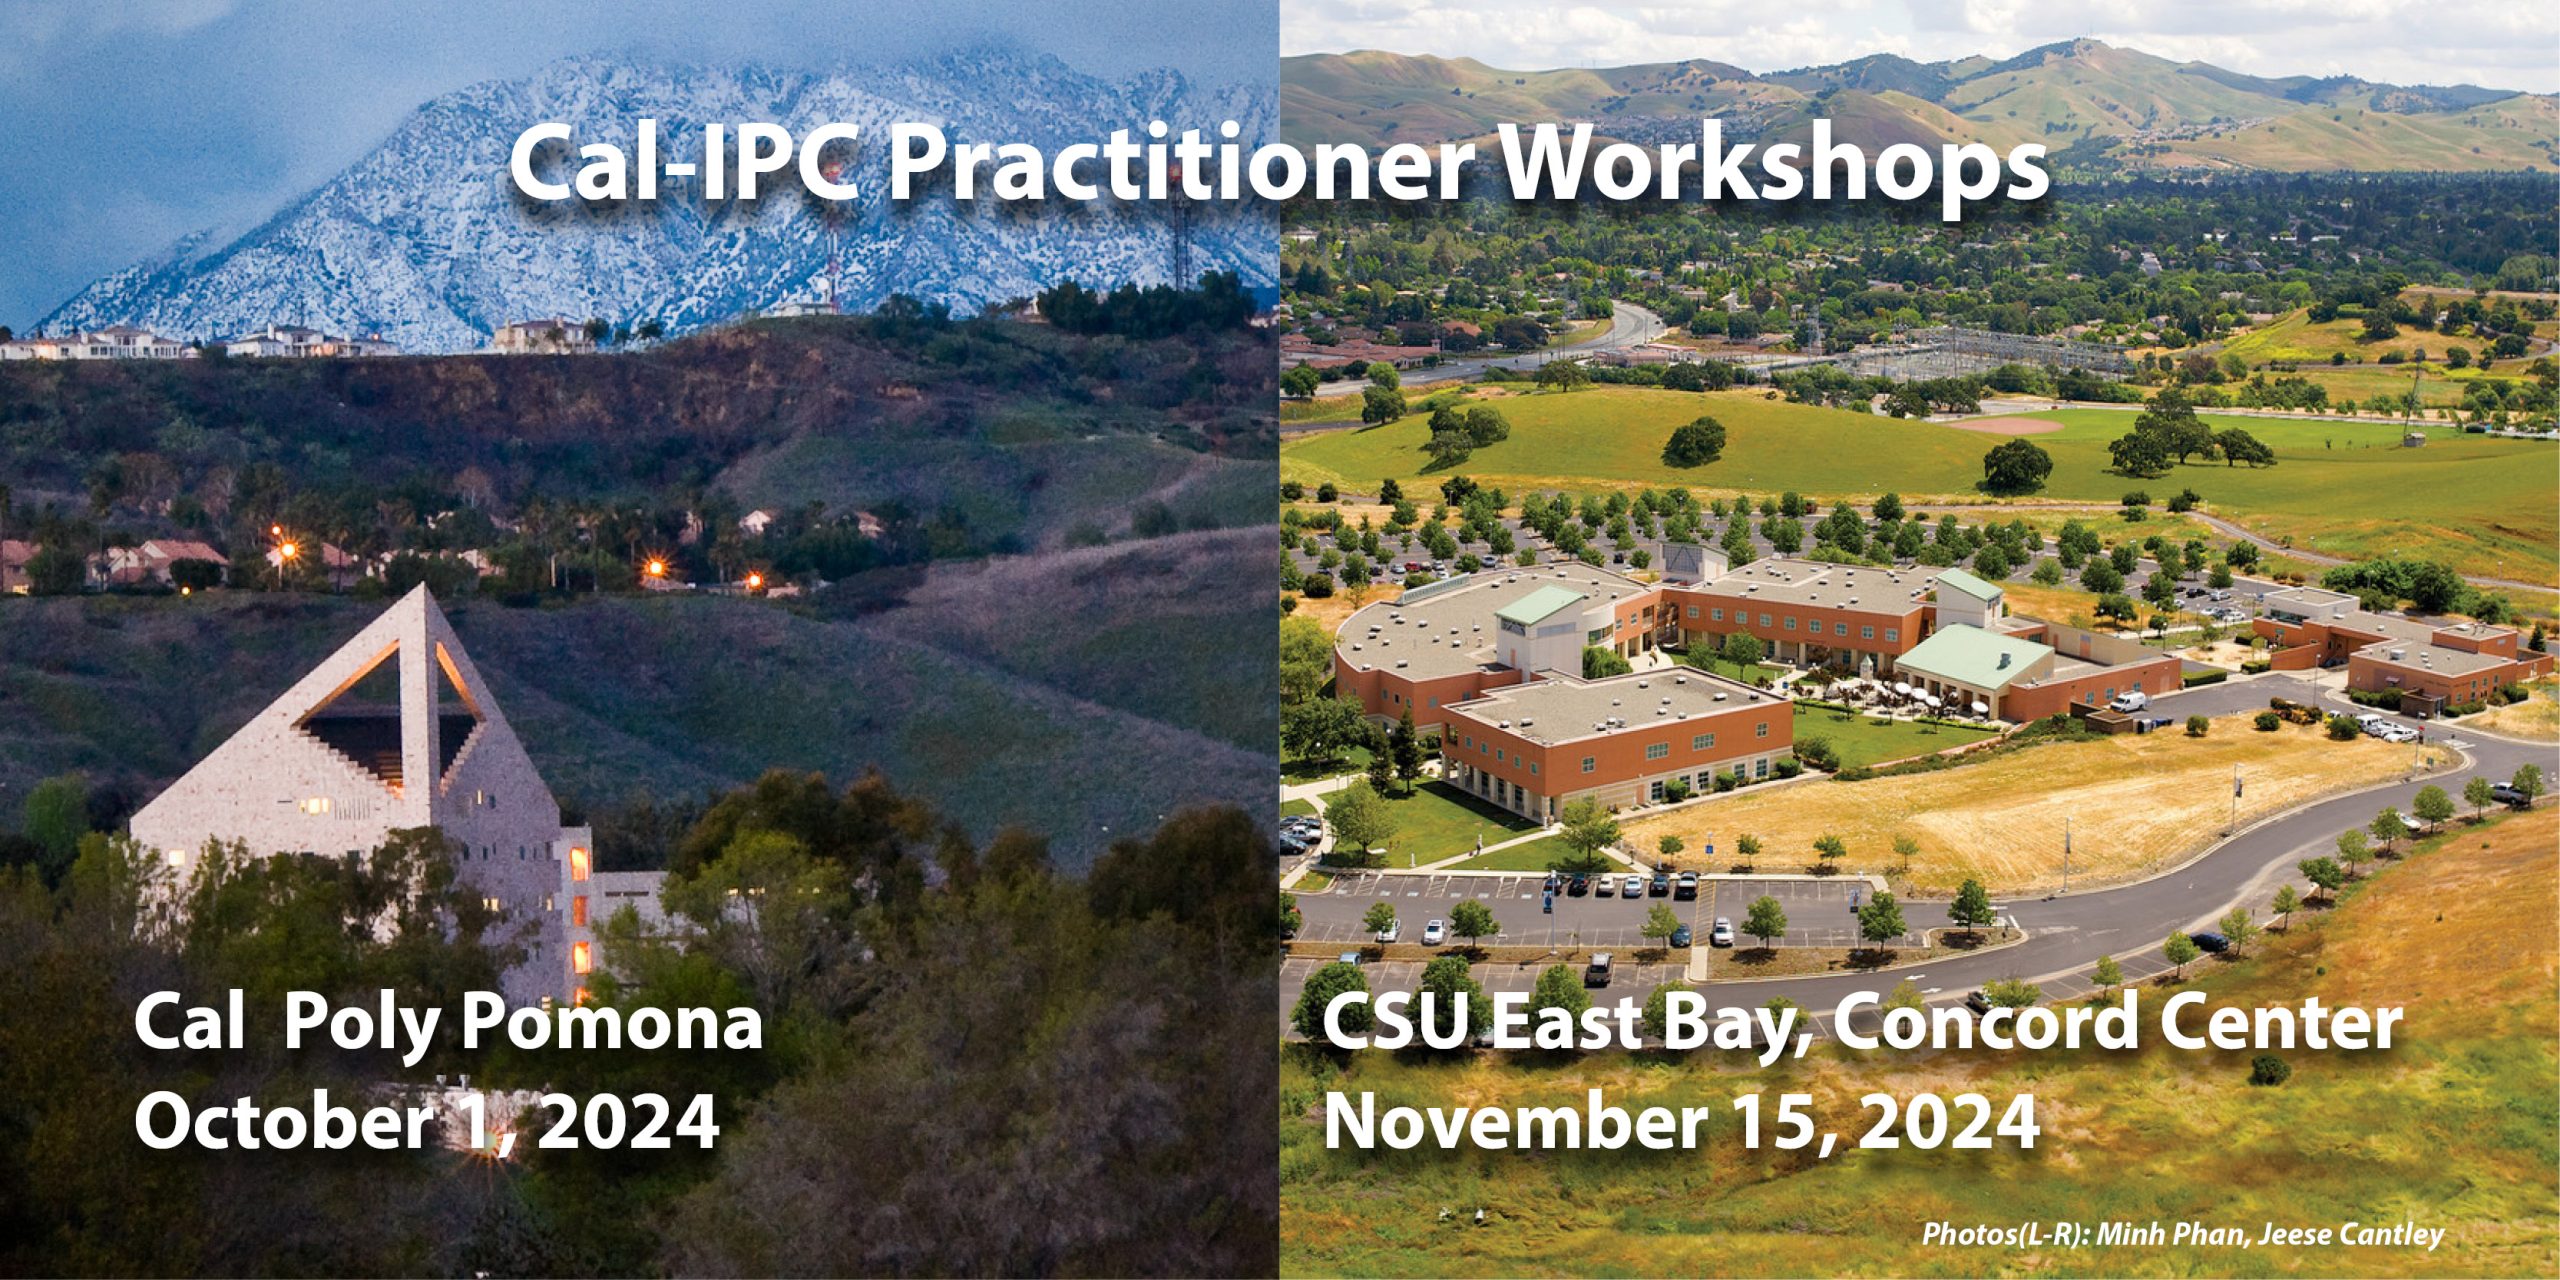 Header image with Cal Poly Pomona and CSU EB Concord Campus text Cal-IPC Practitioner Workshops